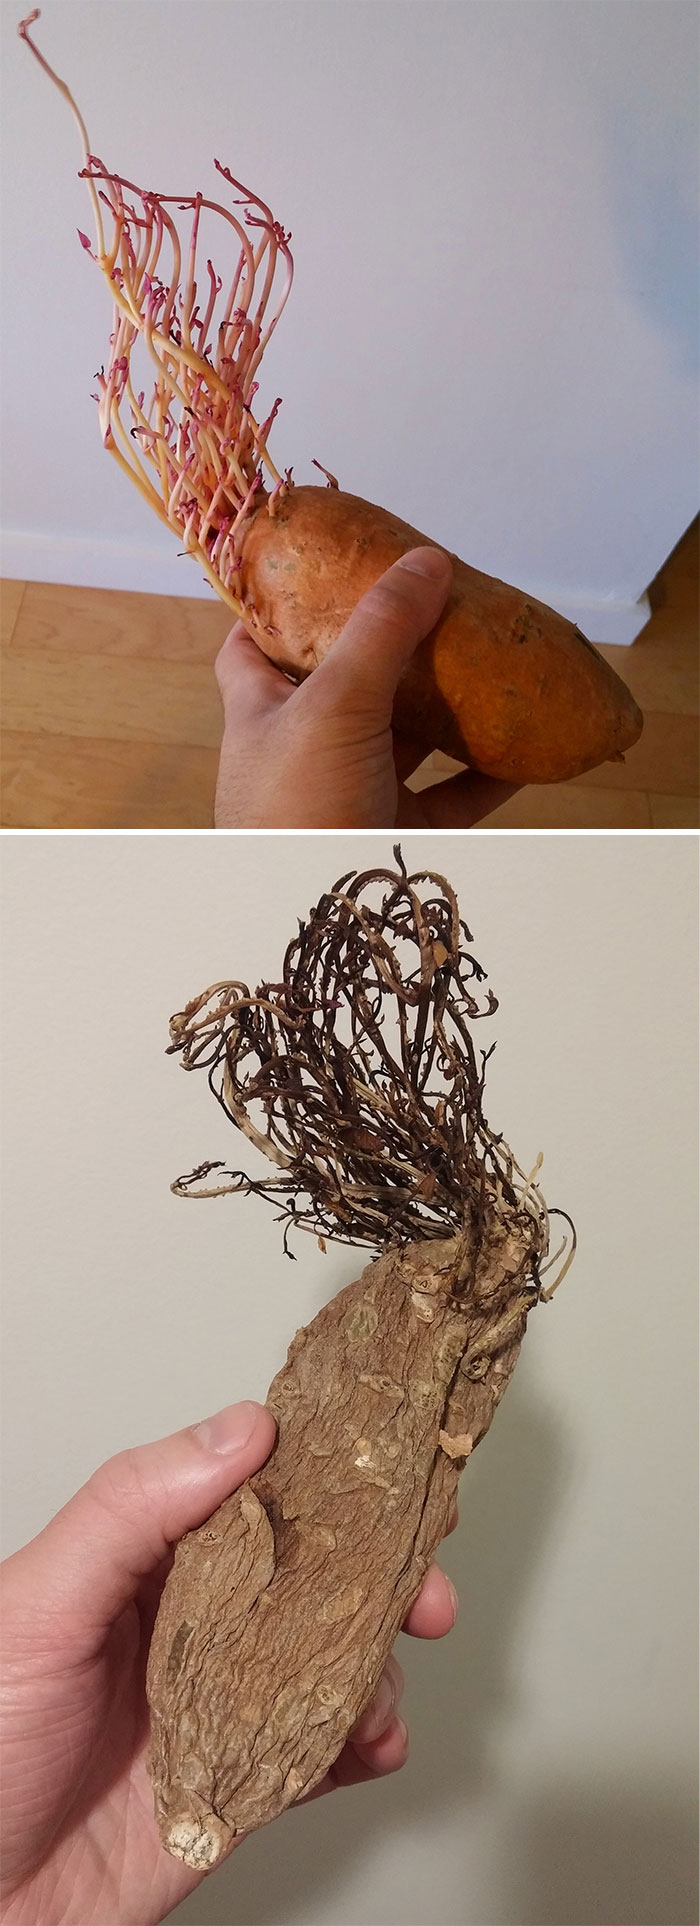 Left A Sprouting Sweet Potato In My Cupboard For A Little Over A Year. Here Are The Results.